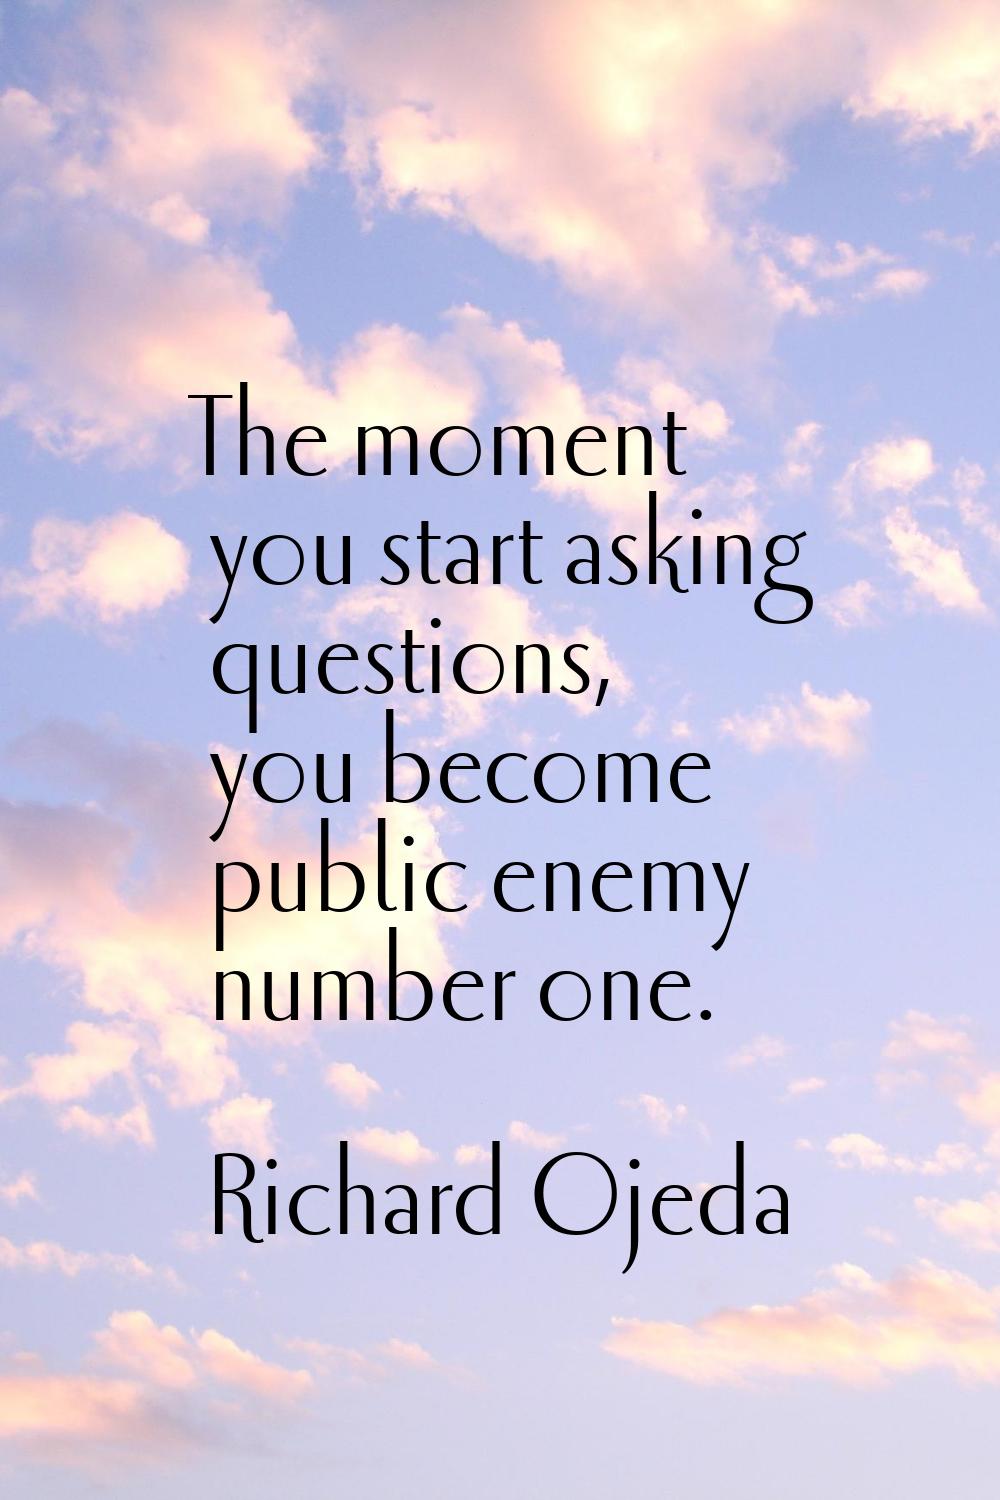 The moment you start asking questions, you become public enemy number one.